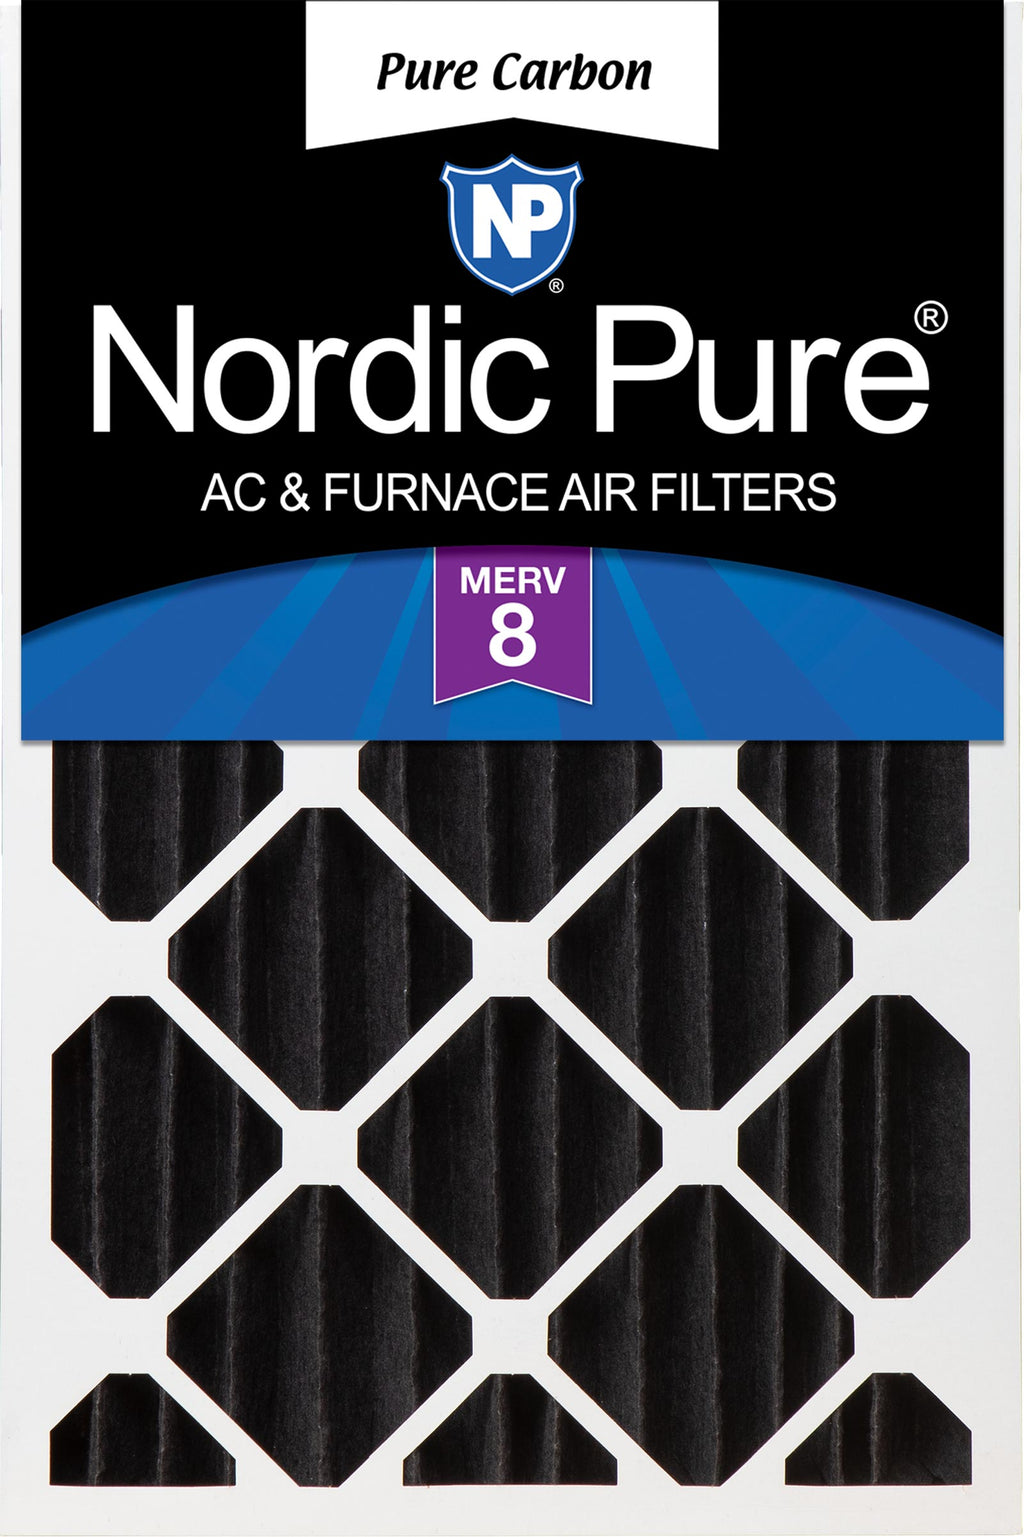 24x24x4 (3 5/8) Pure Carbon Pleated Odor Reduction Merv 8 Furnace Filter